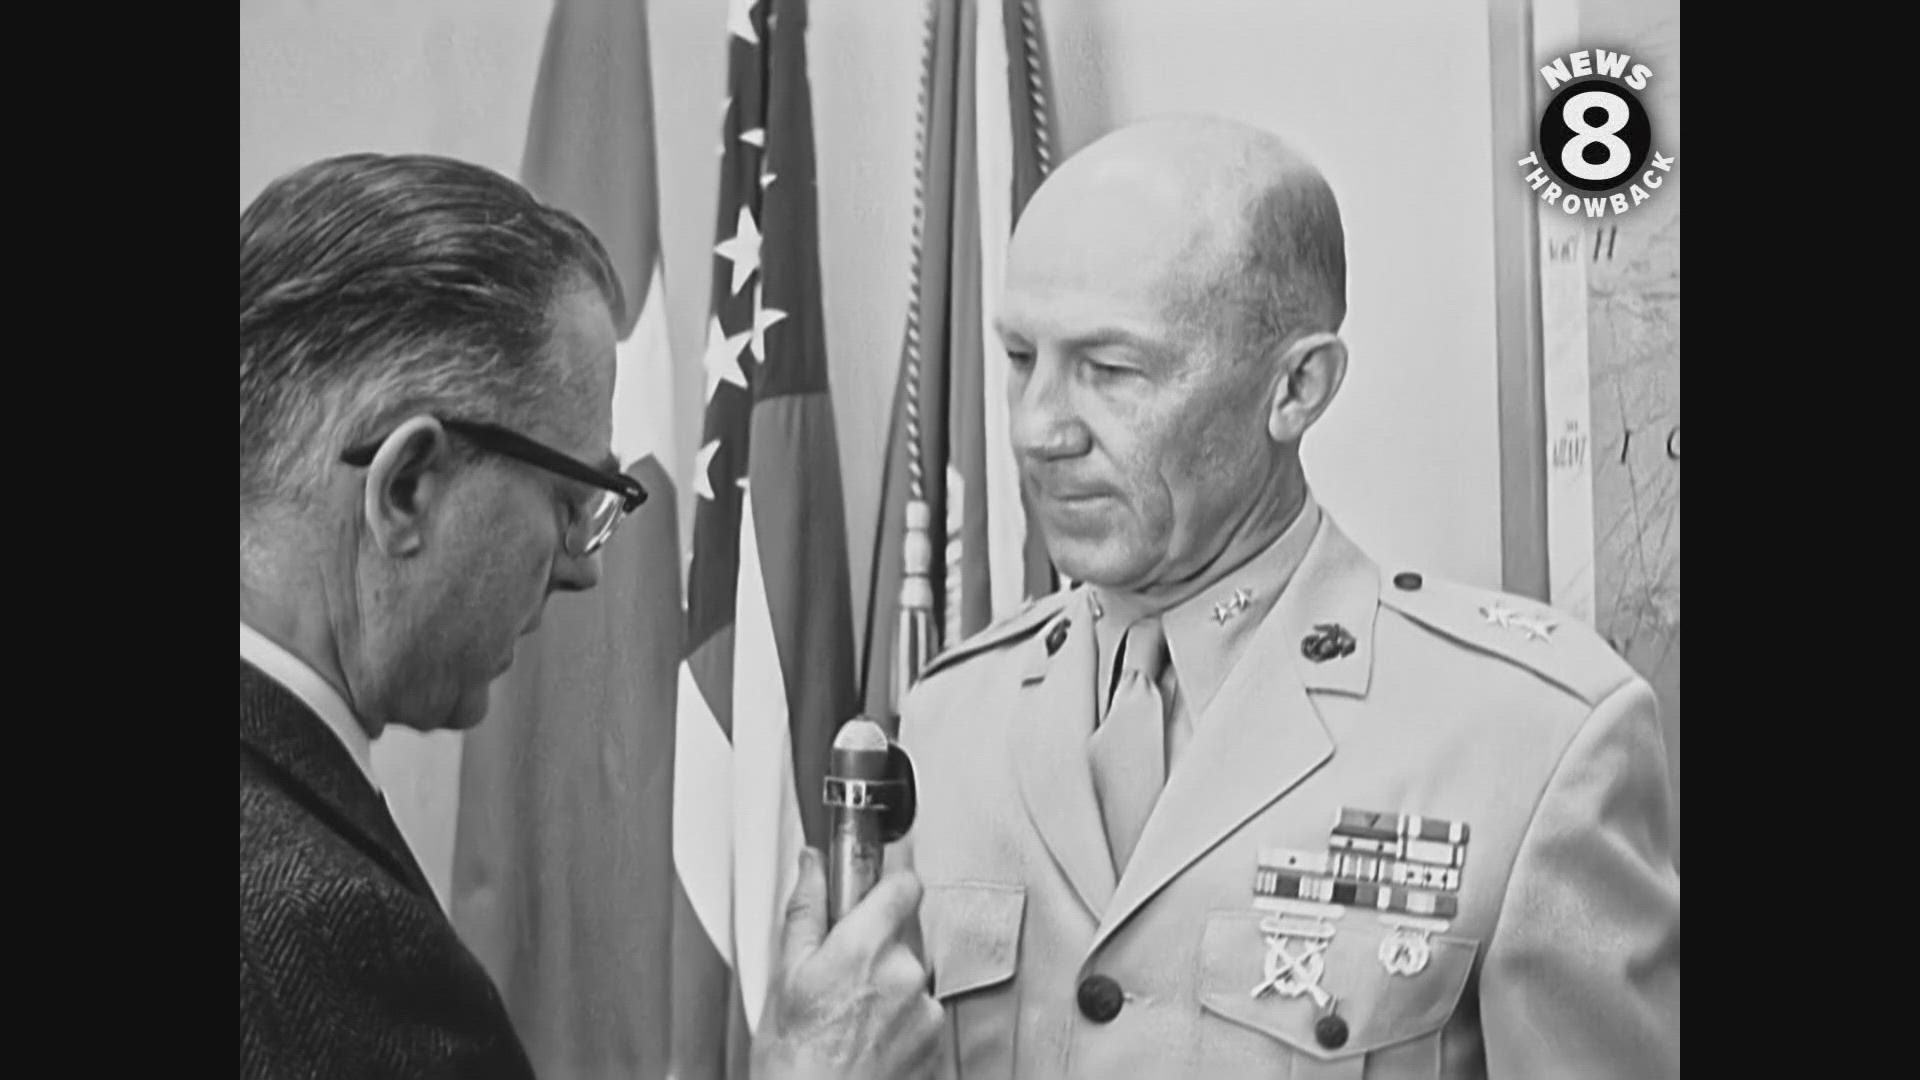 The film of Major General Bruno Hochmuth in San Diego is from 1965 and 1967.